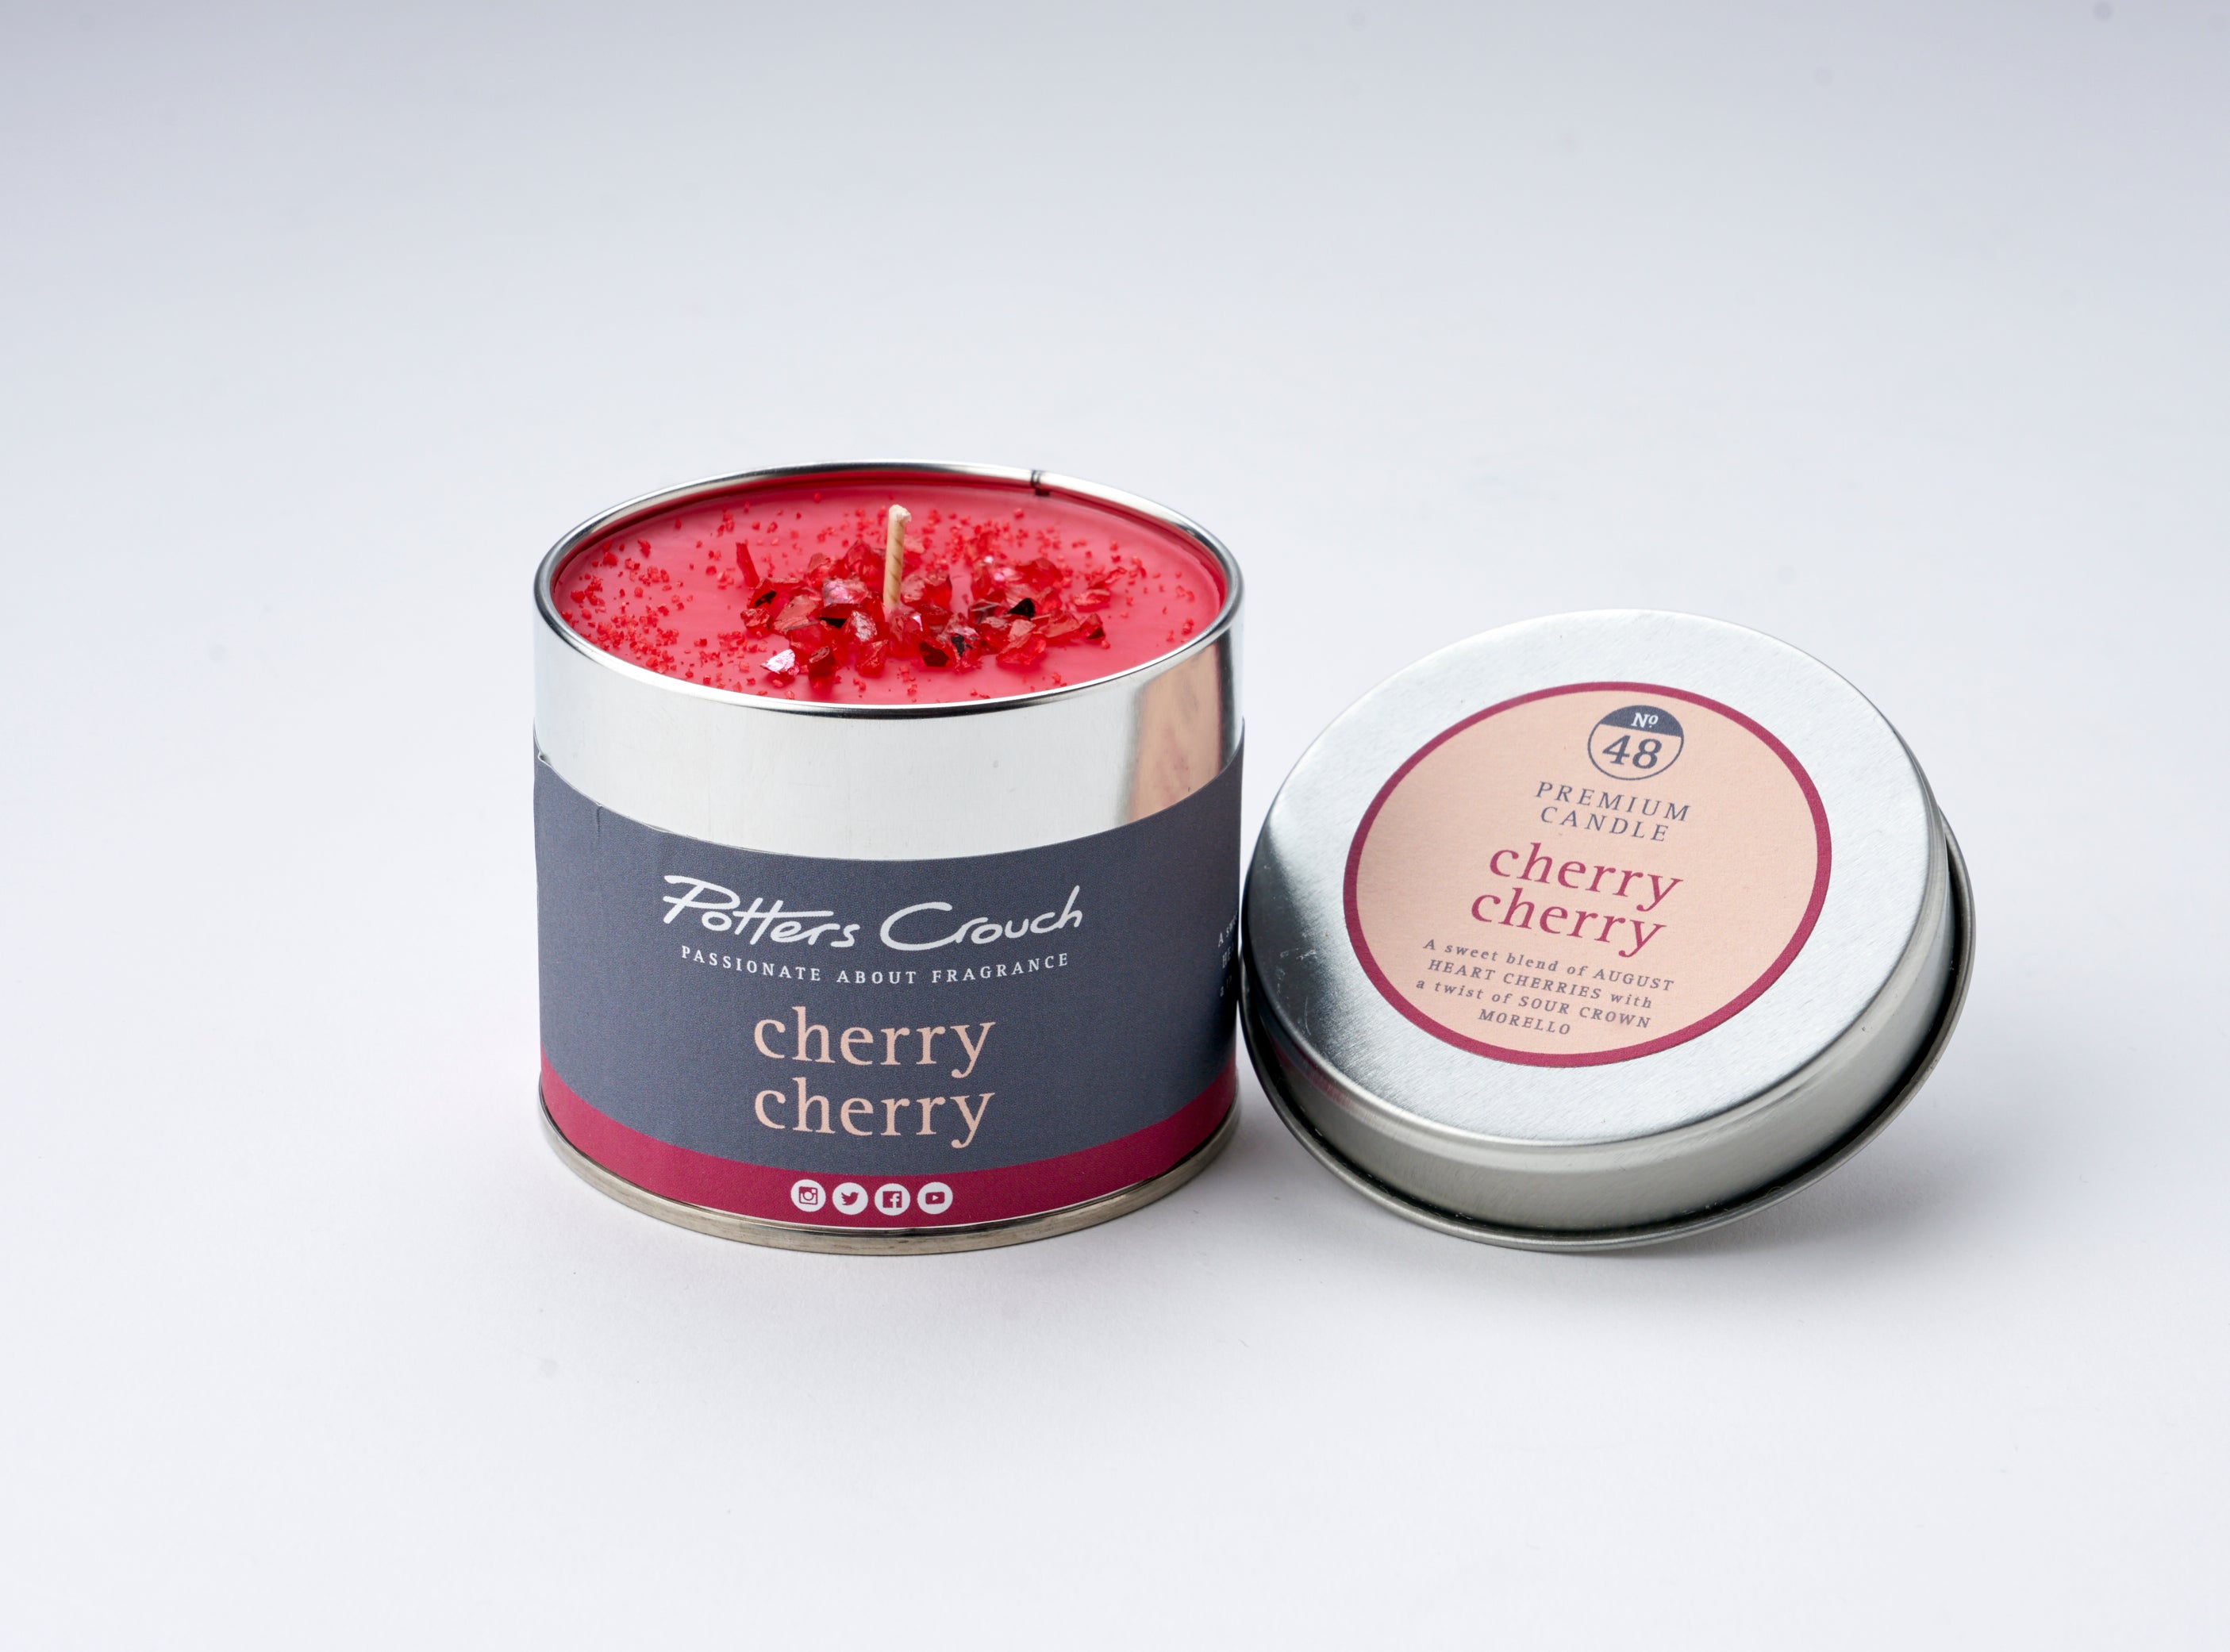 Cherry Cherry - Scented Candle in a Tin - Potters Crouch